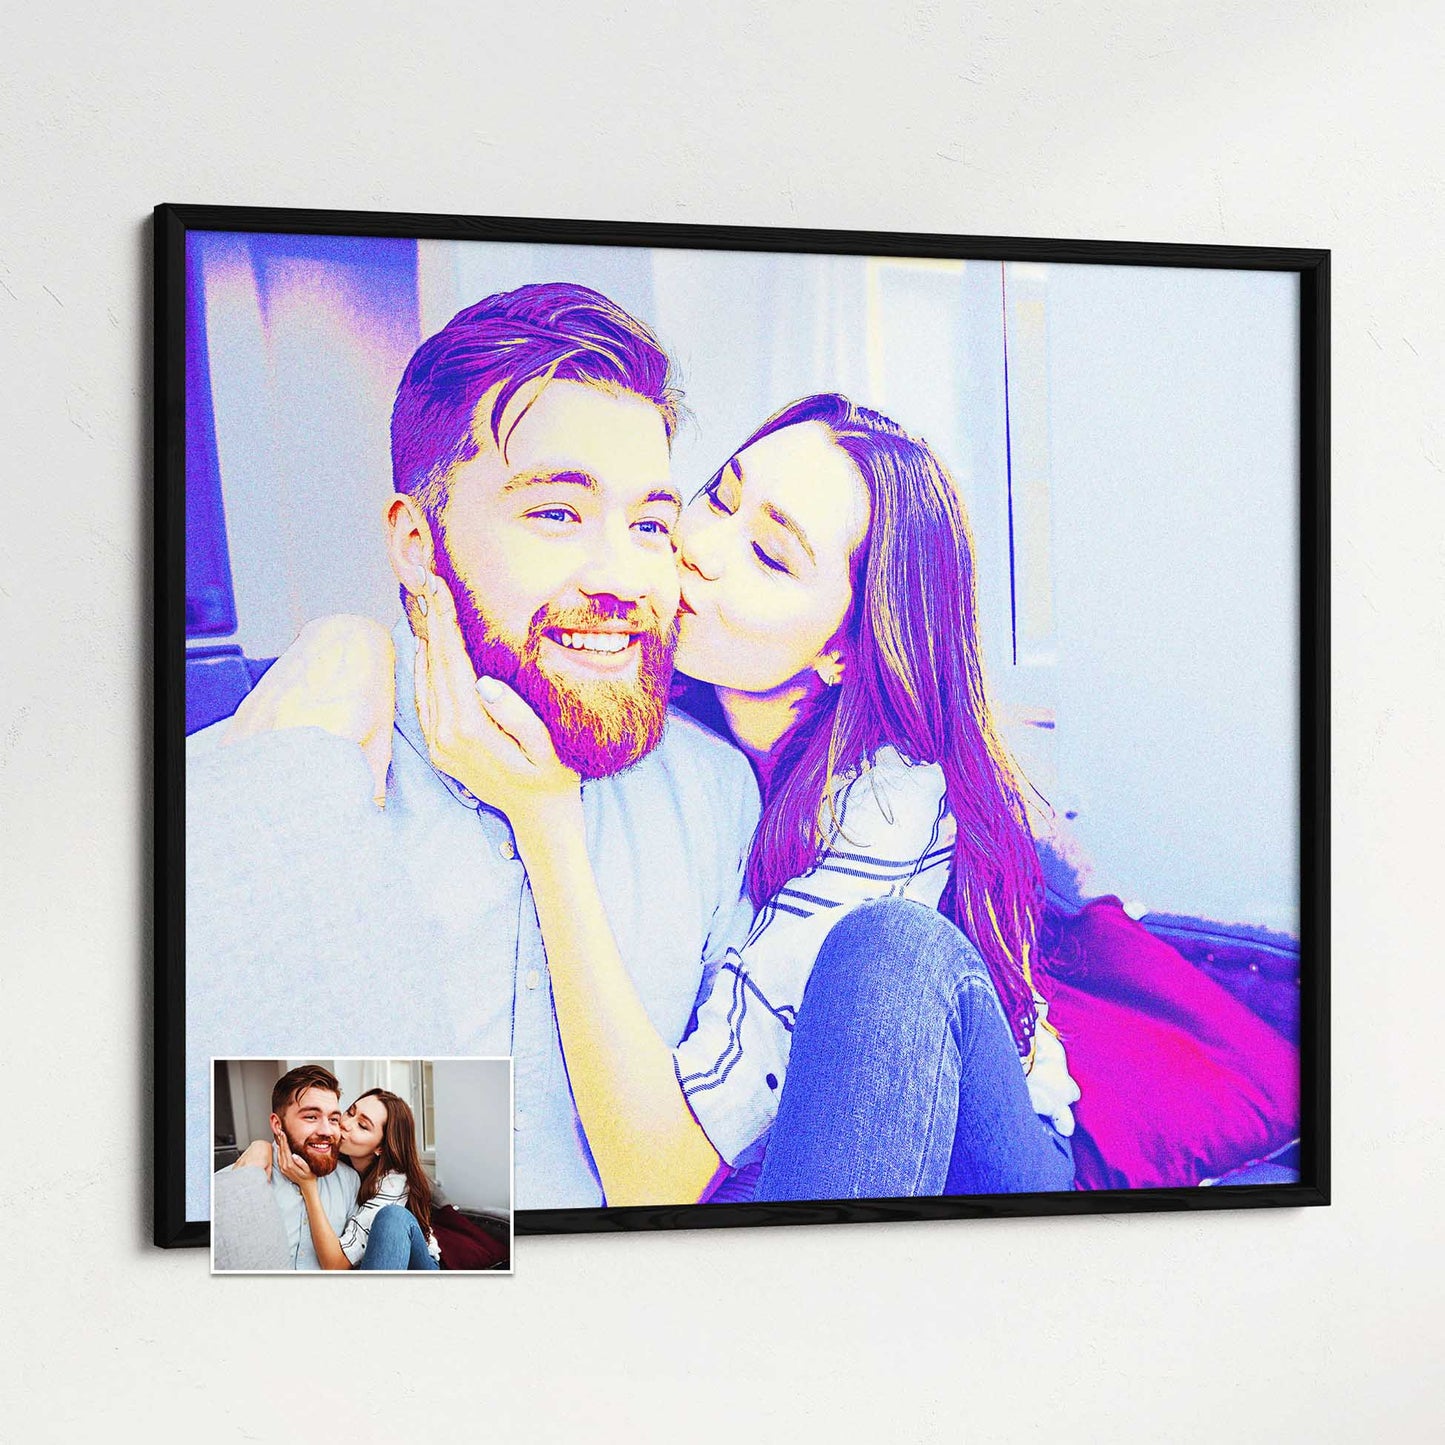 Add a burst of creativity and bold colors to your home decor with the Personalised Blue & Purple Framed Print. This fun and vibrant piece, printed from your photo, exudes energy and a lively atmosphere